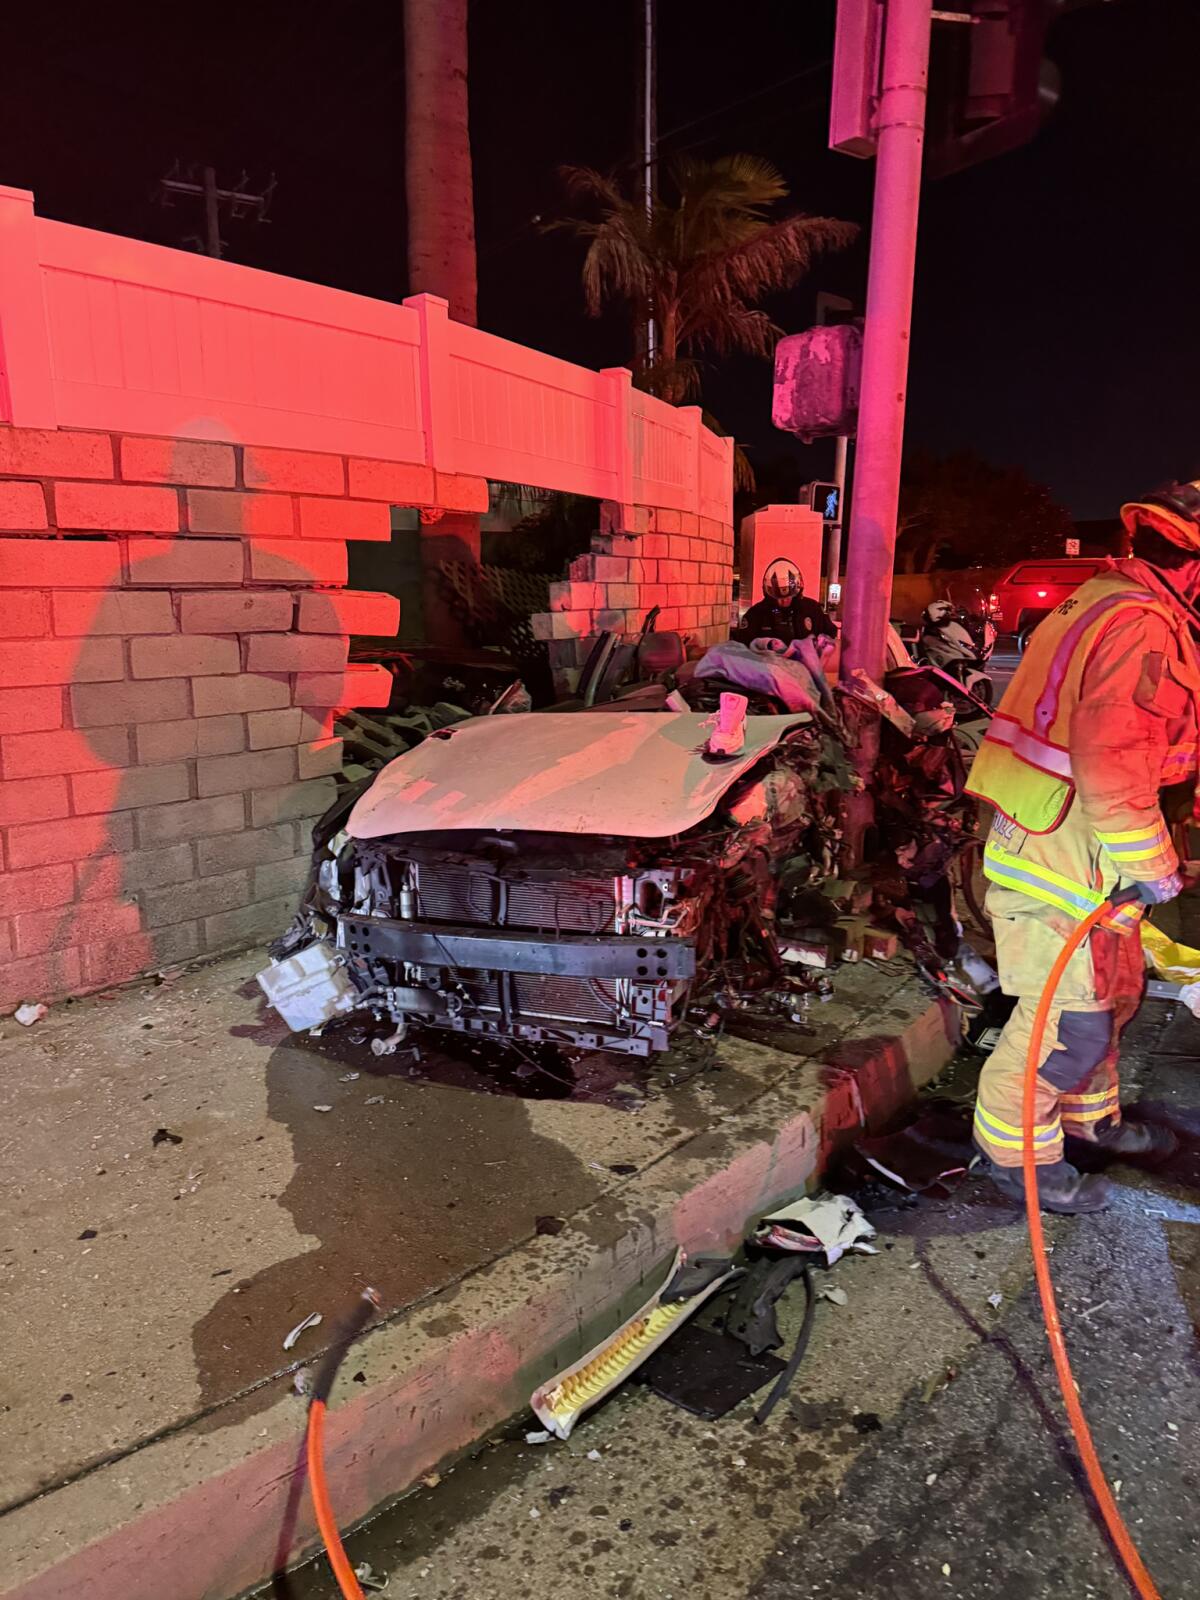 The car involved single-car collision Friday night in Huntington Beach became wedged between a wall and a light pole.